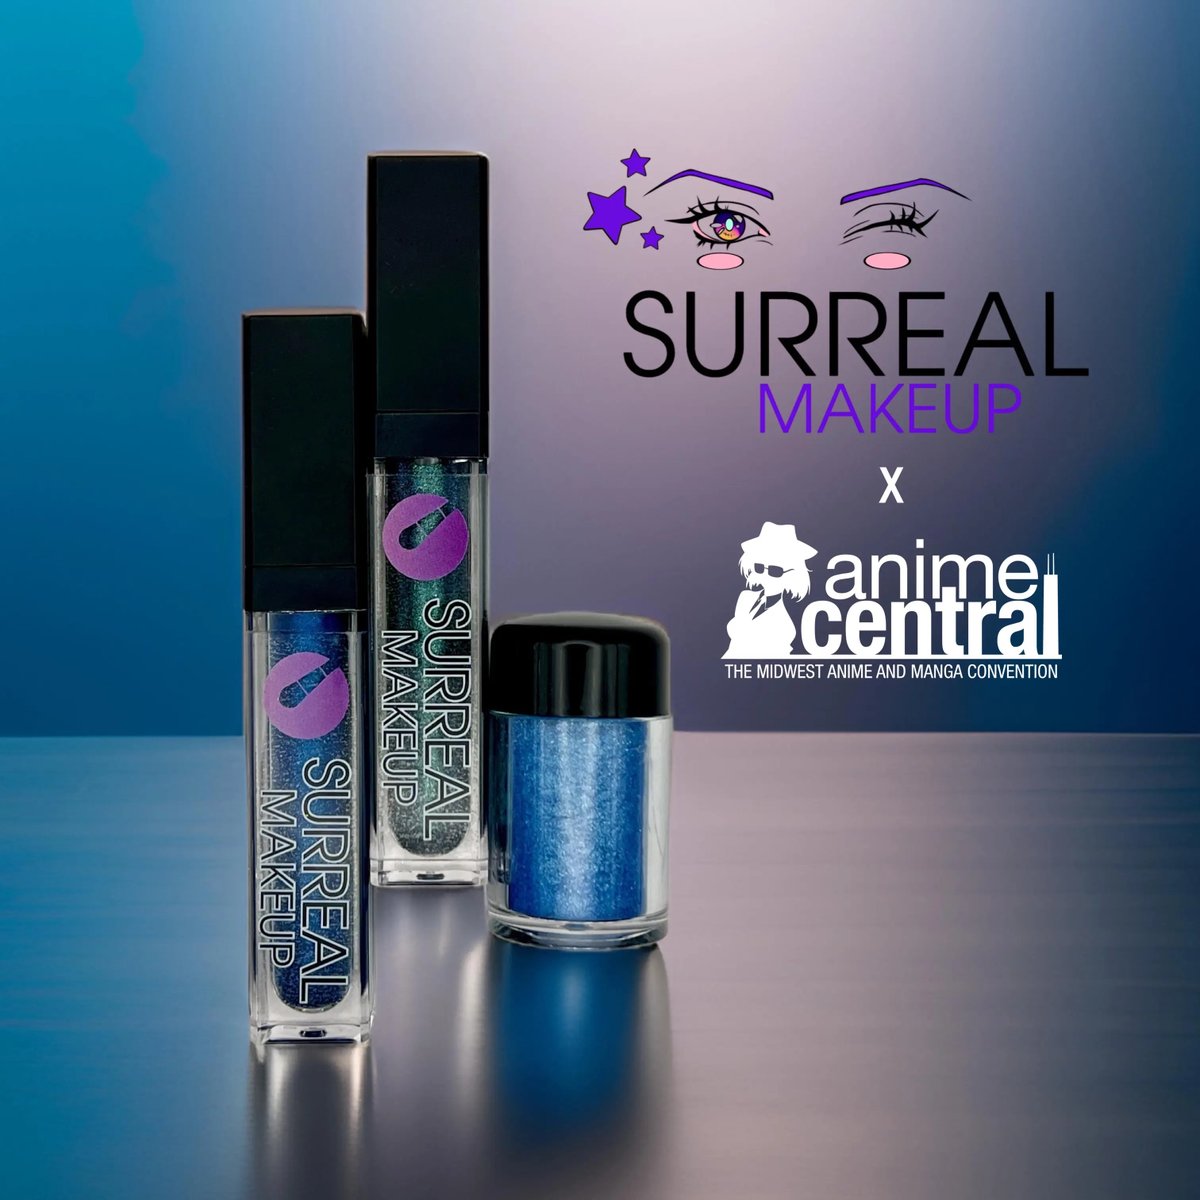 Do you want to look fabulous? Of course you do! We are partnering with Surreal Makeup to bring you the ACENSATIONAL Make Up Kit!. Head over to booth 007 during con to get this gorgeous make up kit. Tell em Kit sent you!